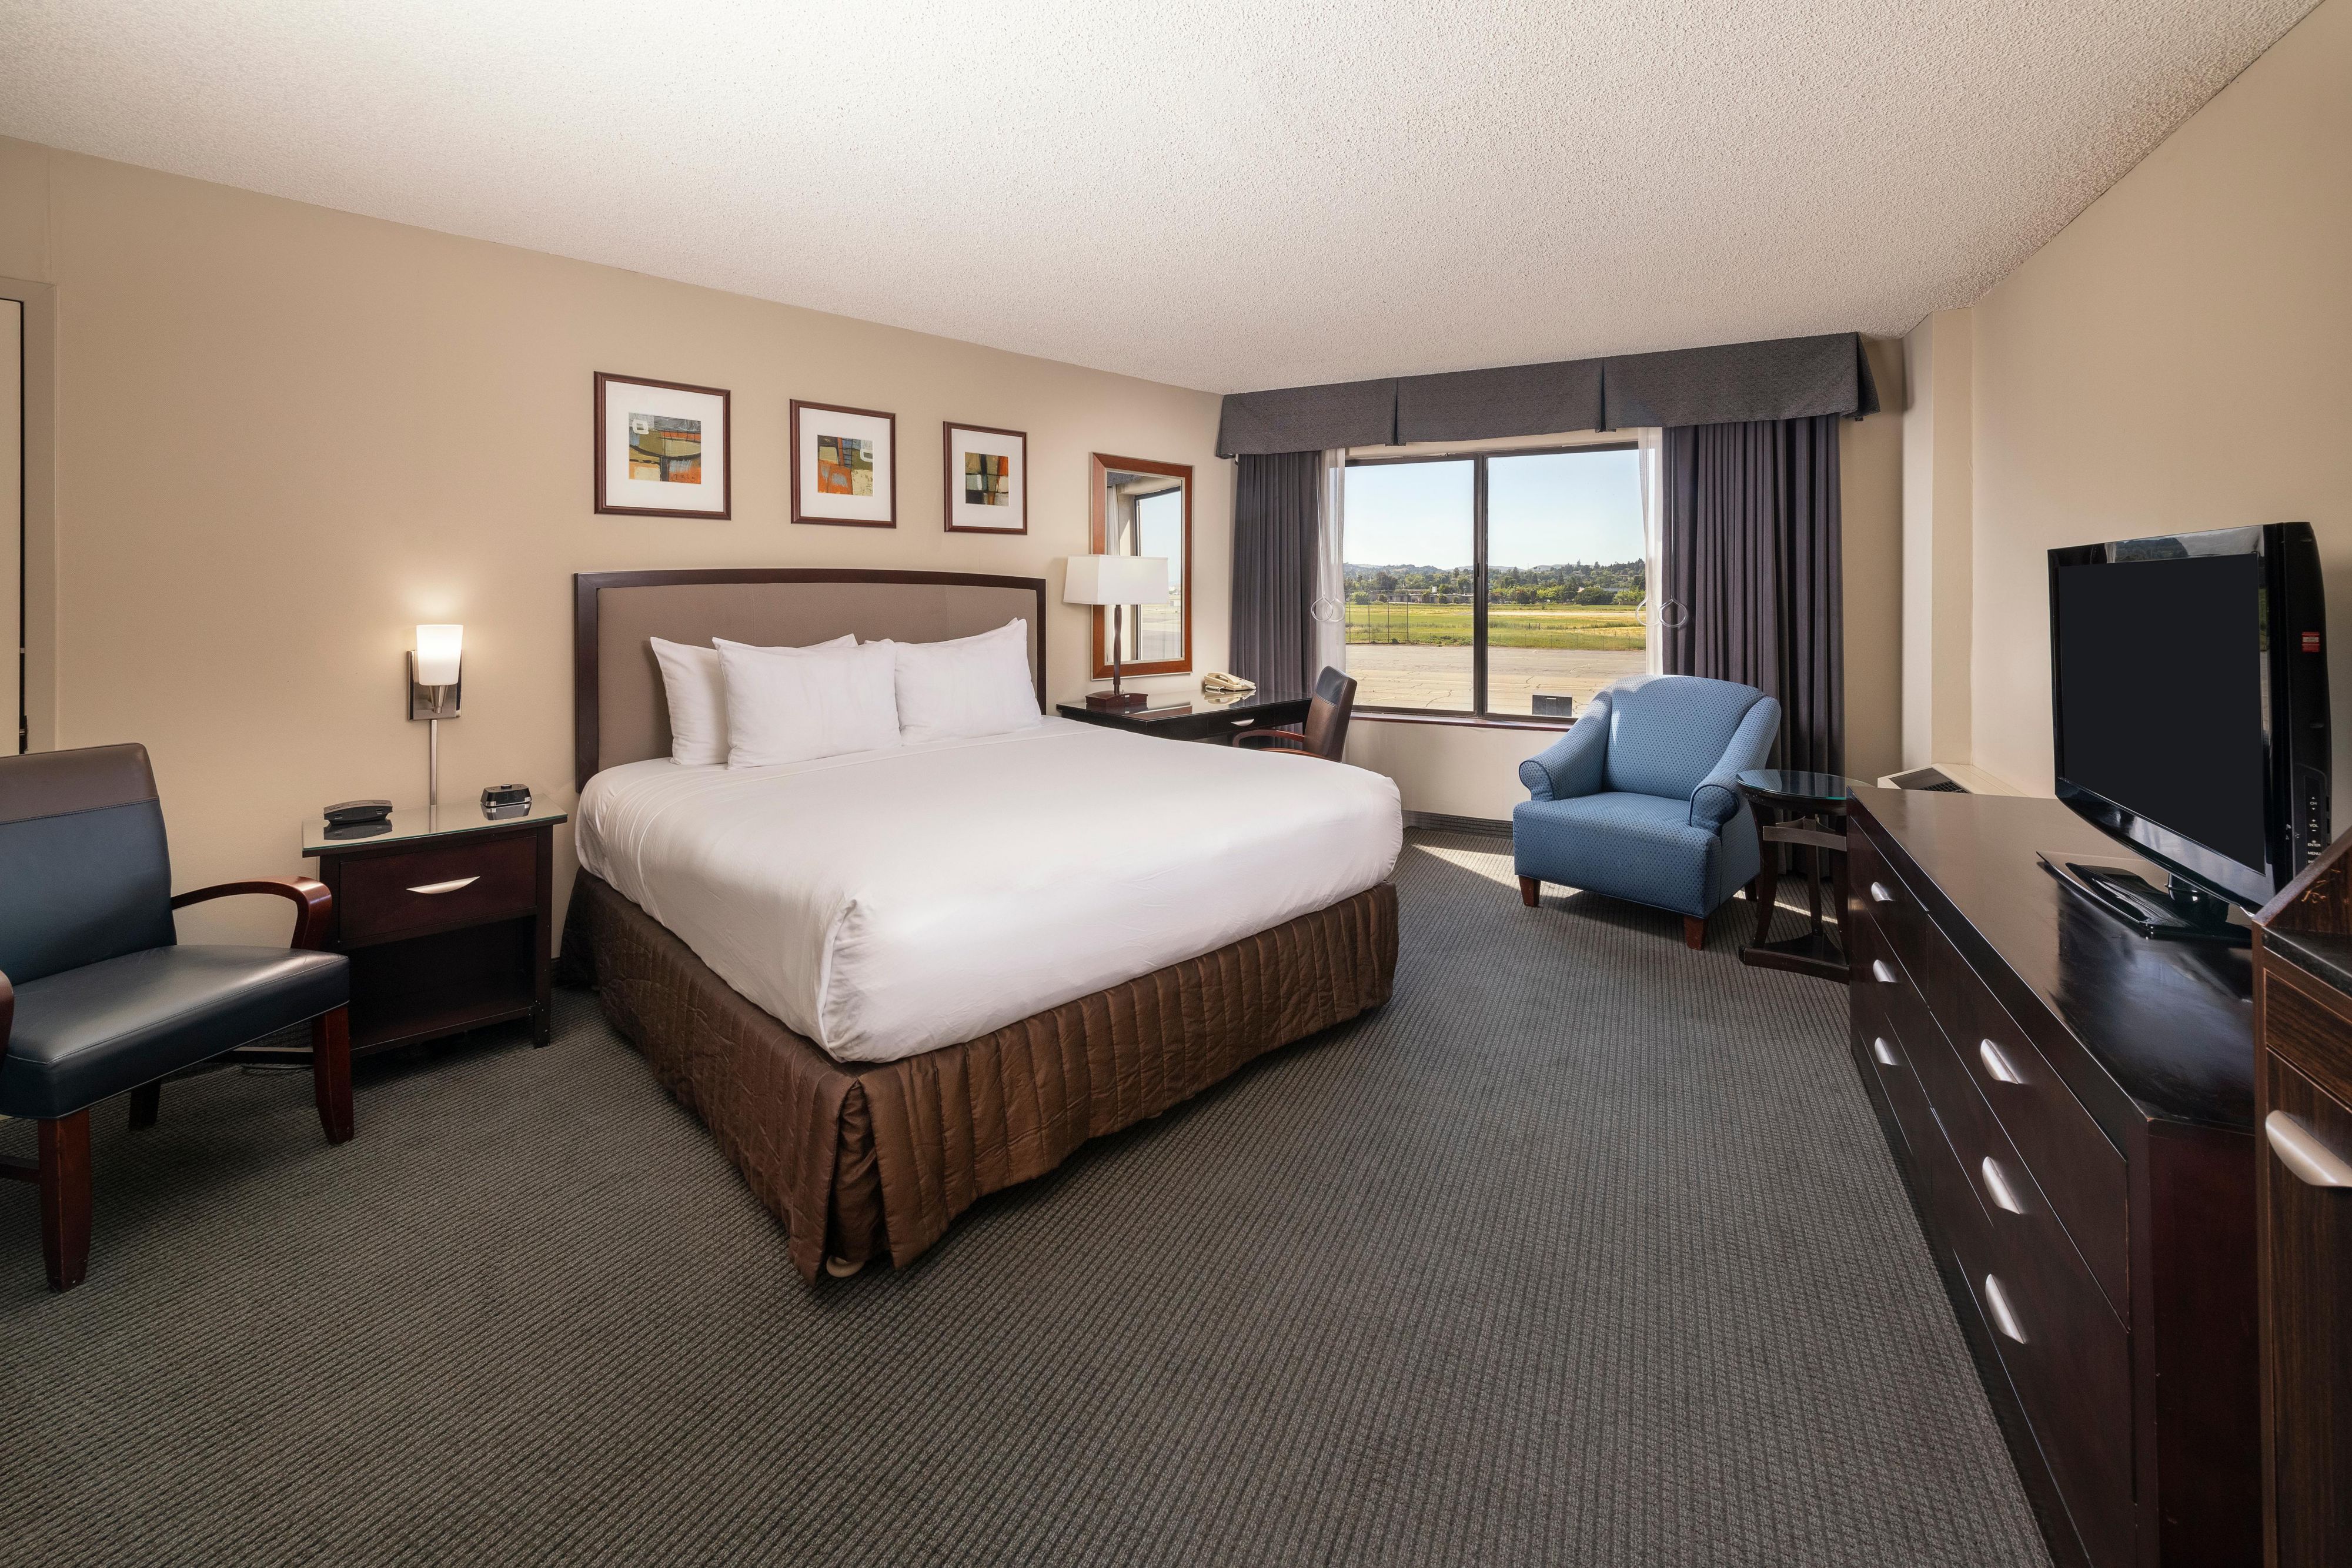 Make yourself at home in our king guest rooms.